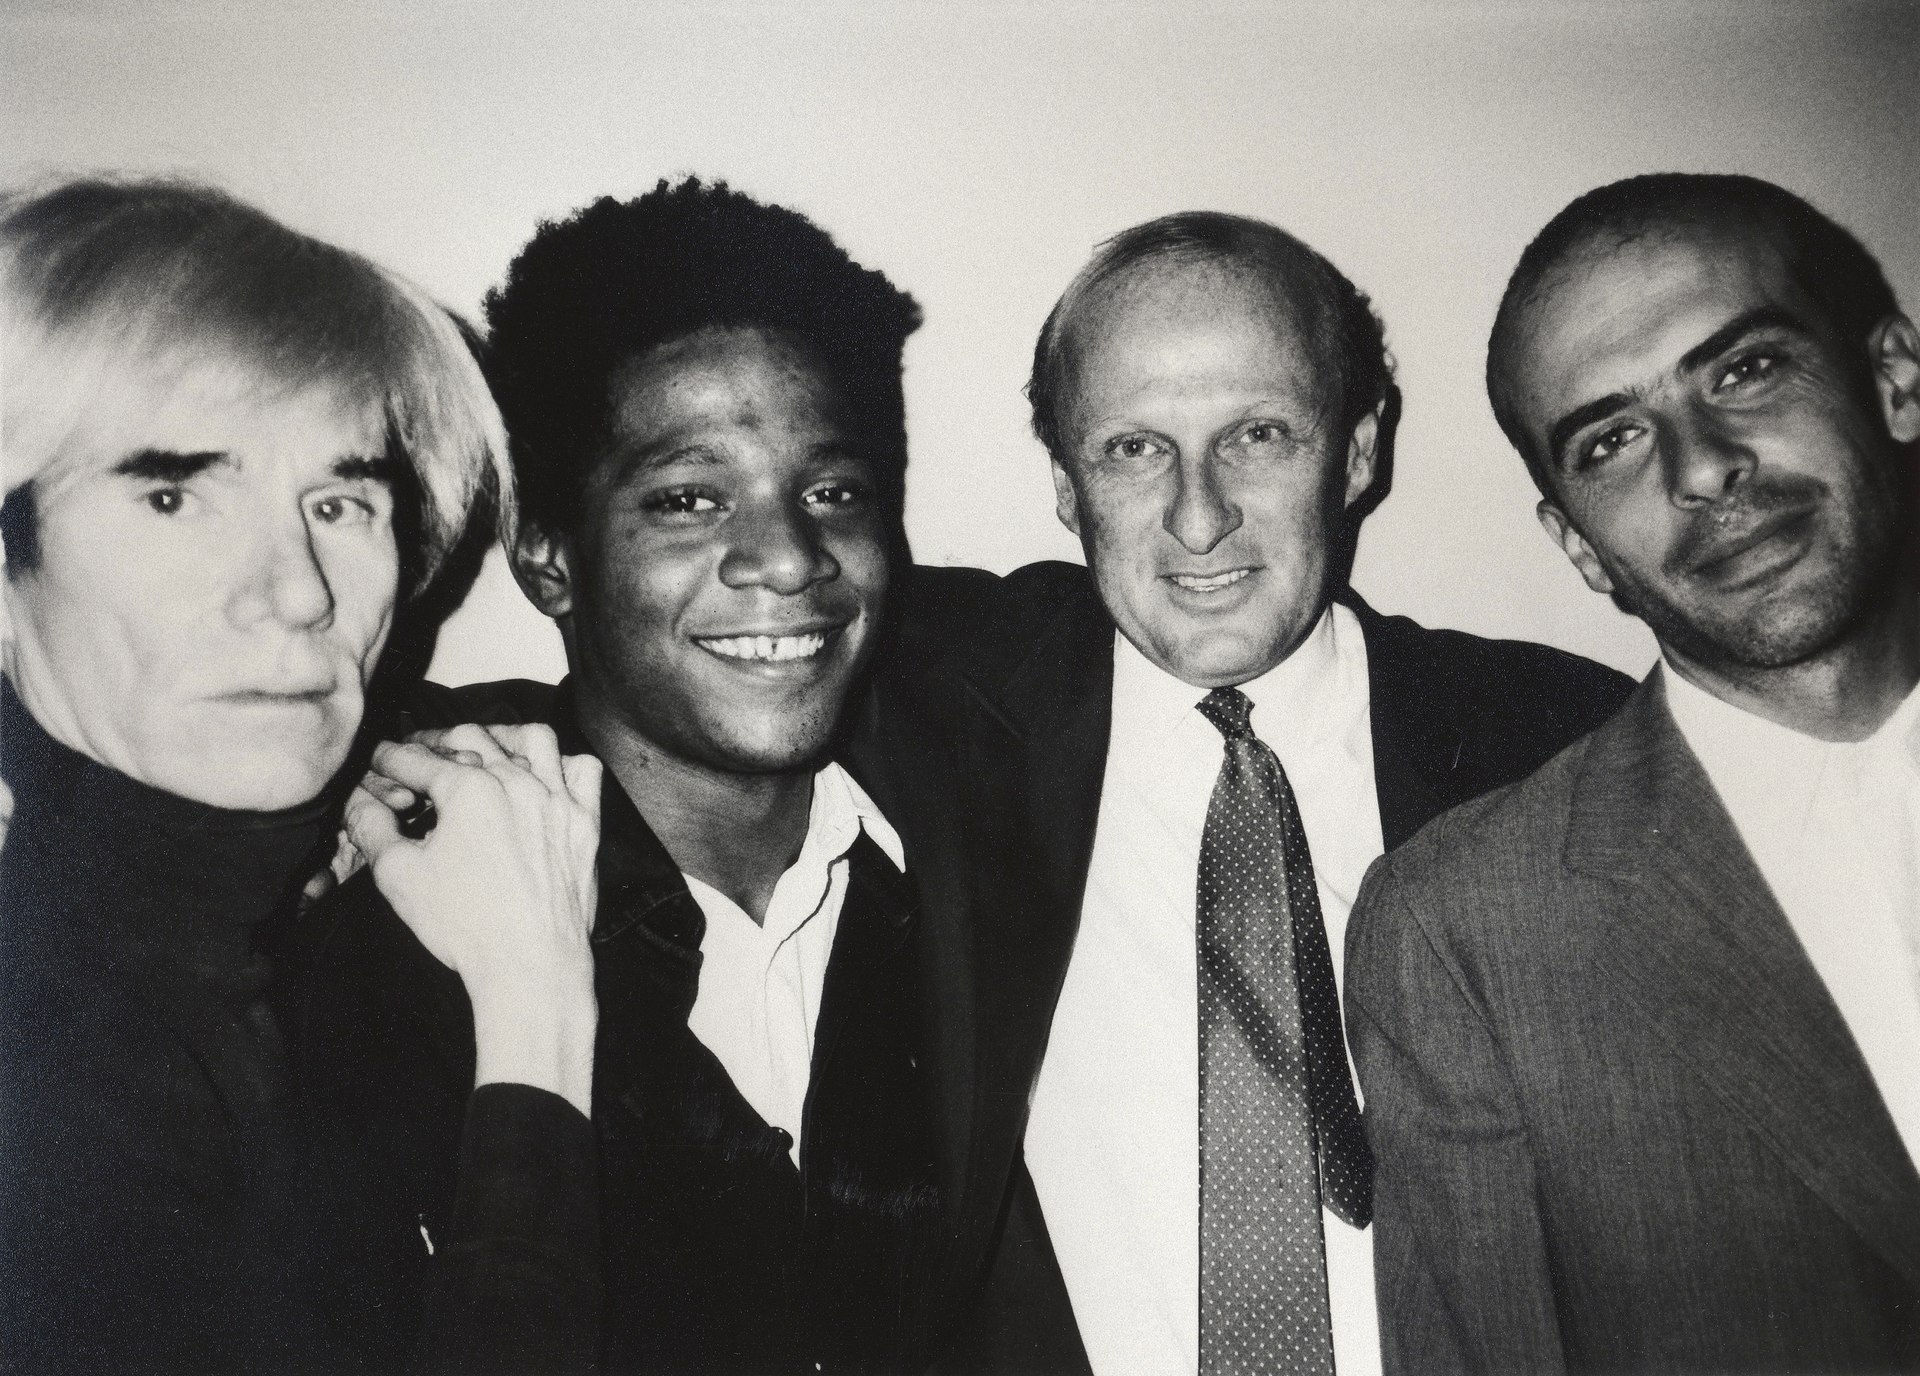 Andy Warhol, Jean-Michel Basquiat, Bruno Bischofbeger and Fransesco Clemente smiling and looking at the camera.